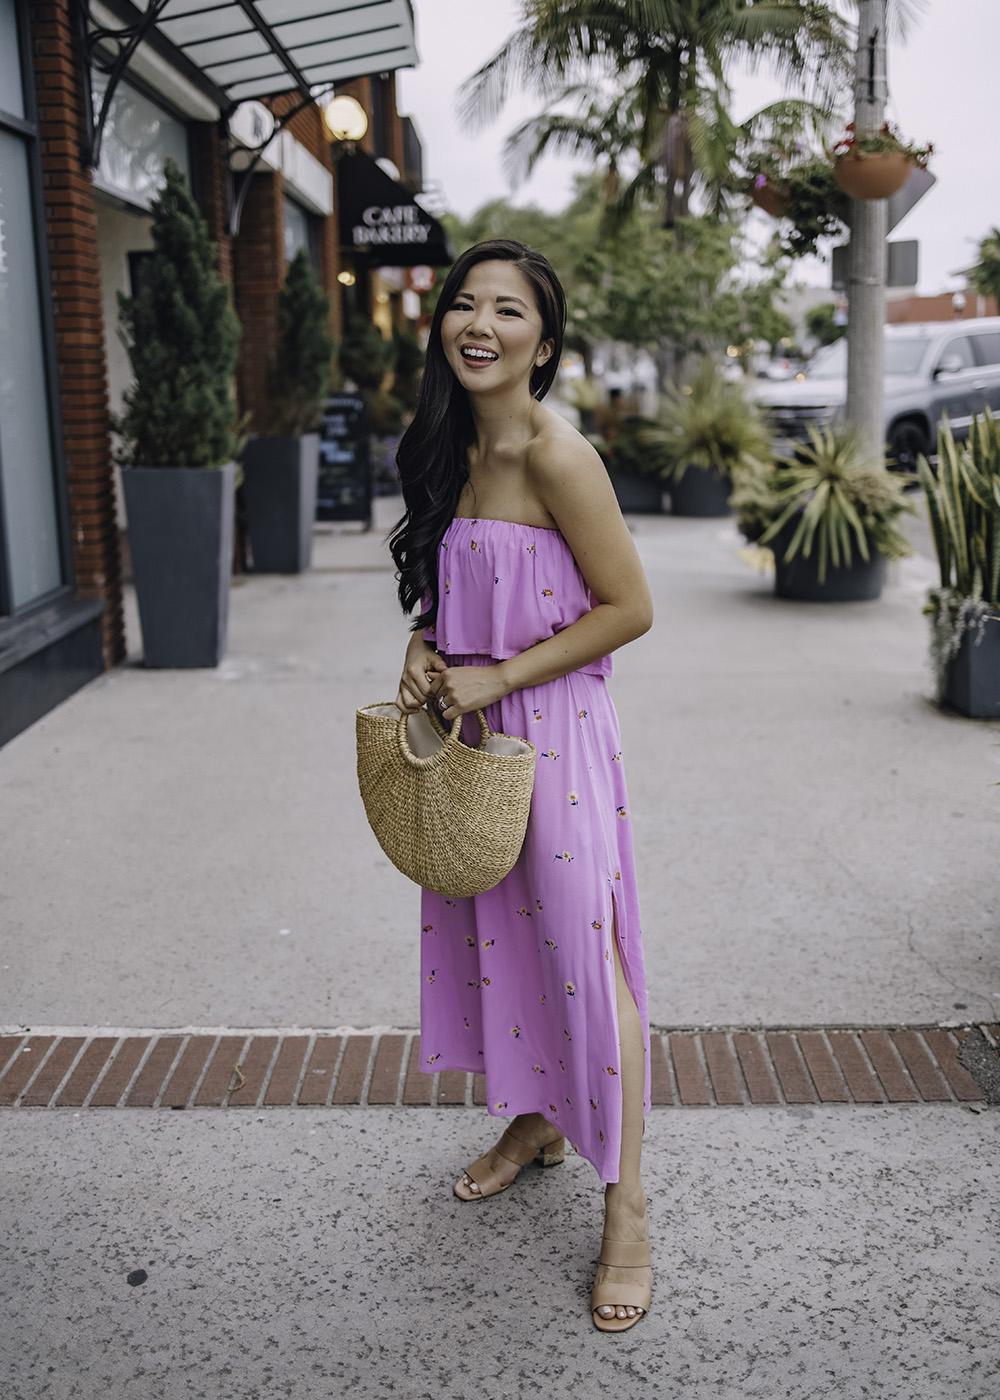 Summer Outfit: Pink Strapless Floral Dress